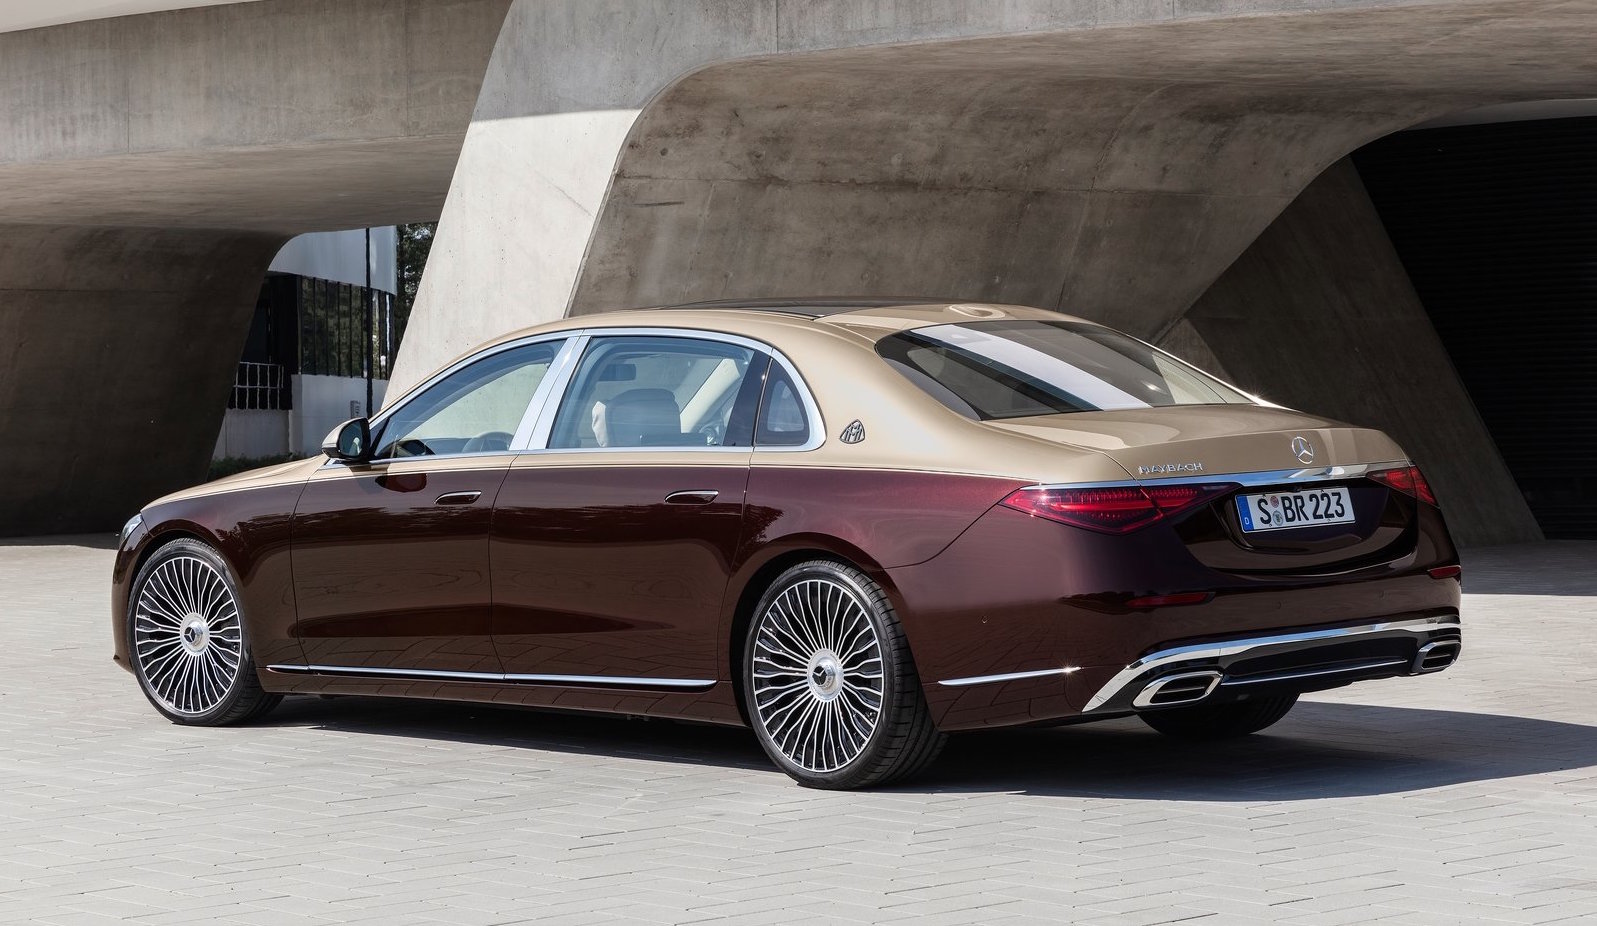 Exquisite 2021 Mercedes-Maybach S-Class revealed – PerformanceDrive